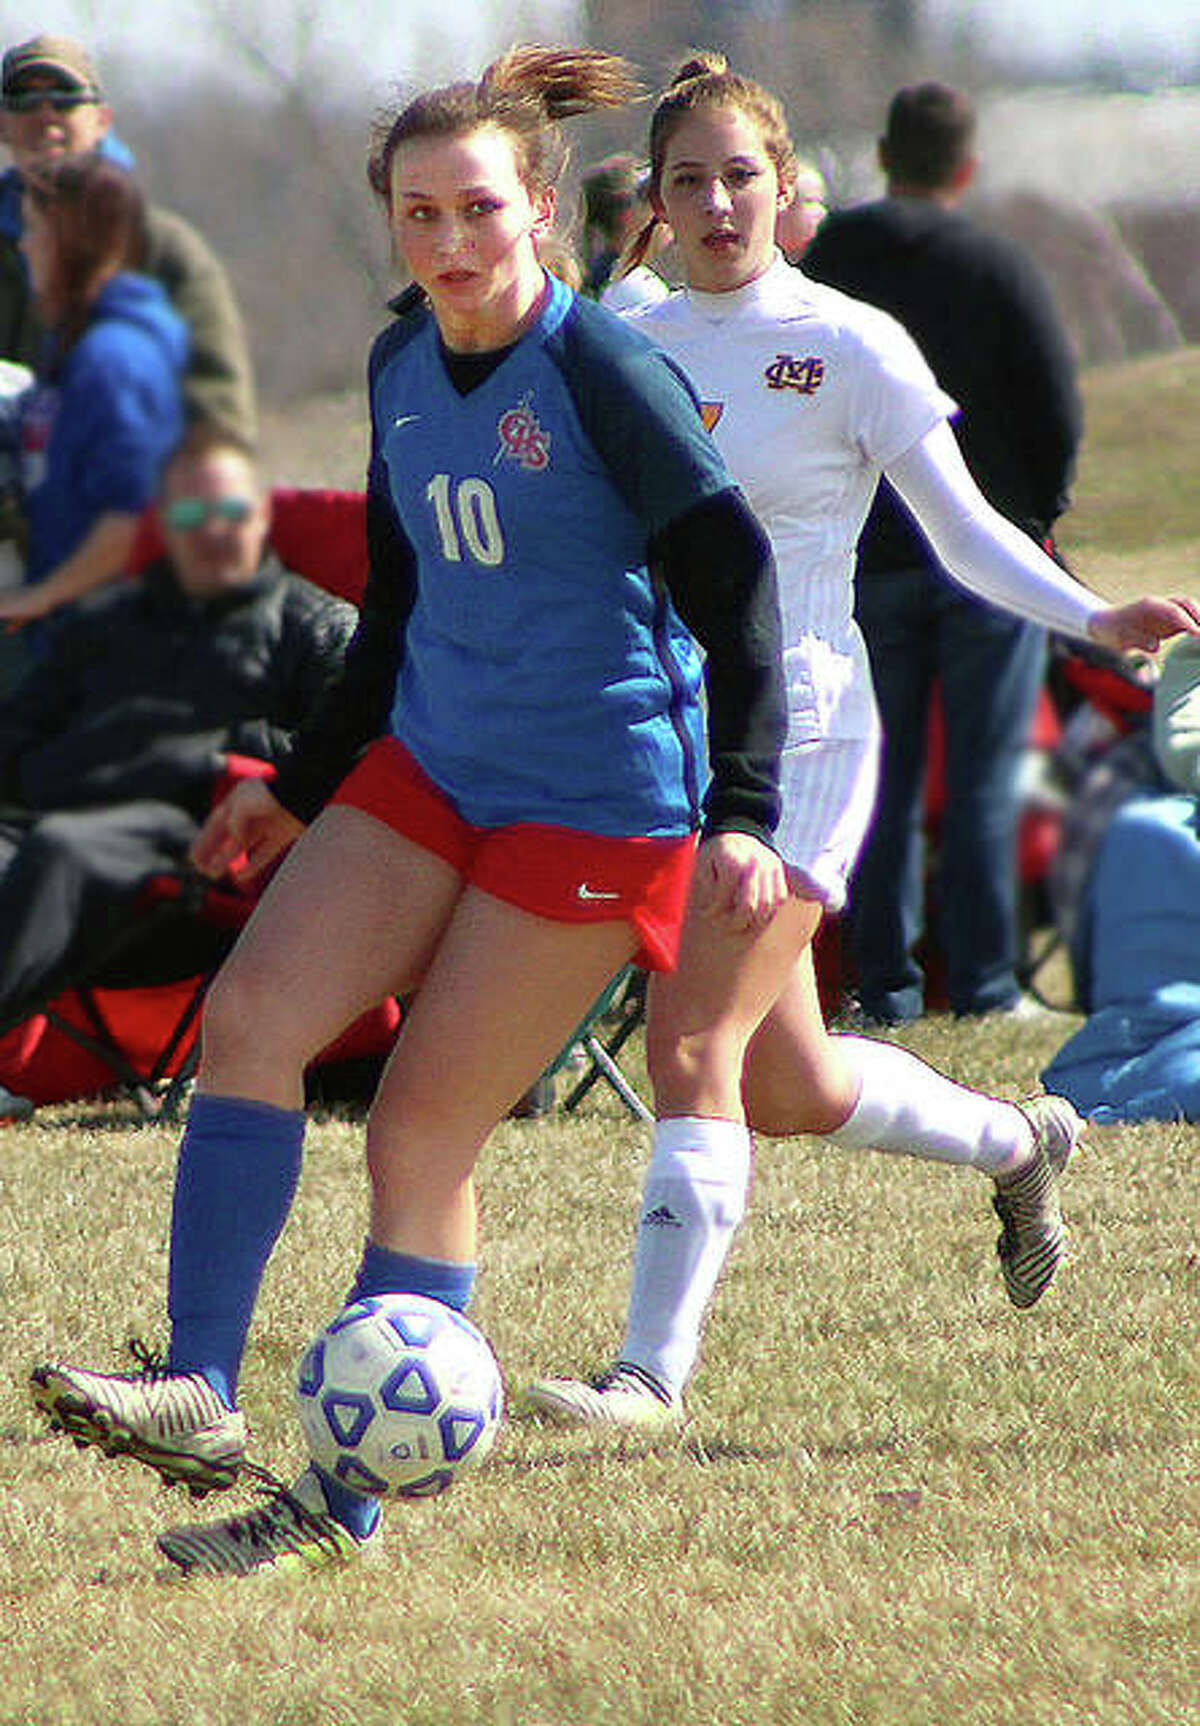 Carlinville’s Lexi Egelhoff (10) controls the ball against Civic Memorial. She and her Cavies teammates played the Eagles to a 0-0 tie Wednesday in Carlinville.